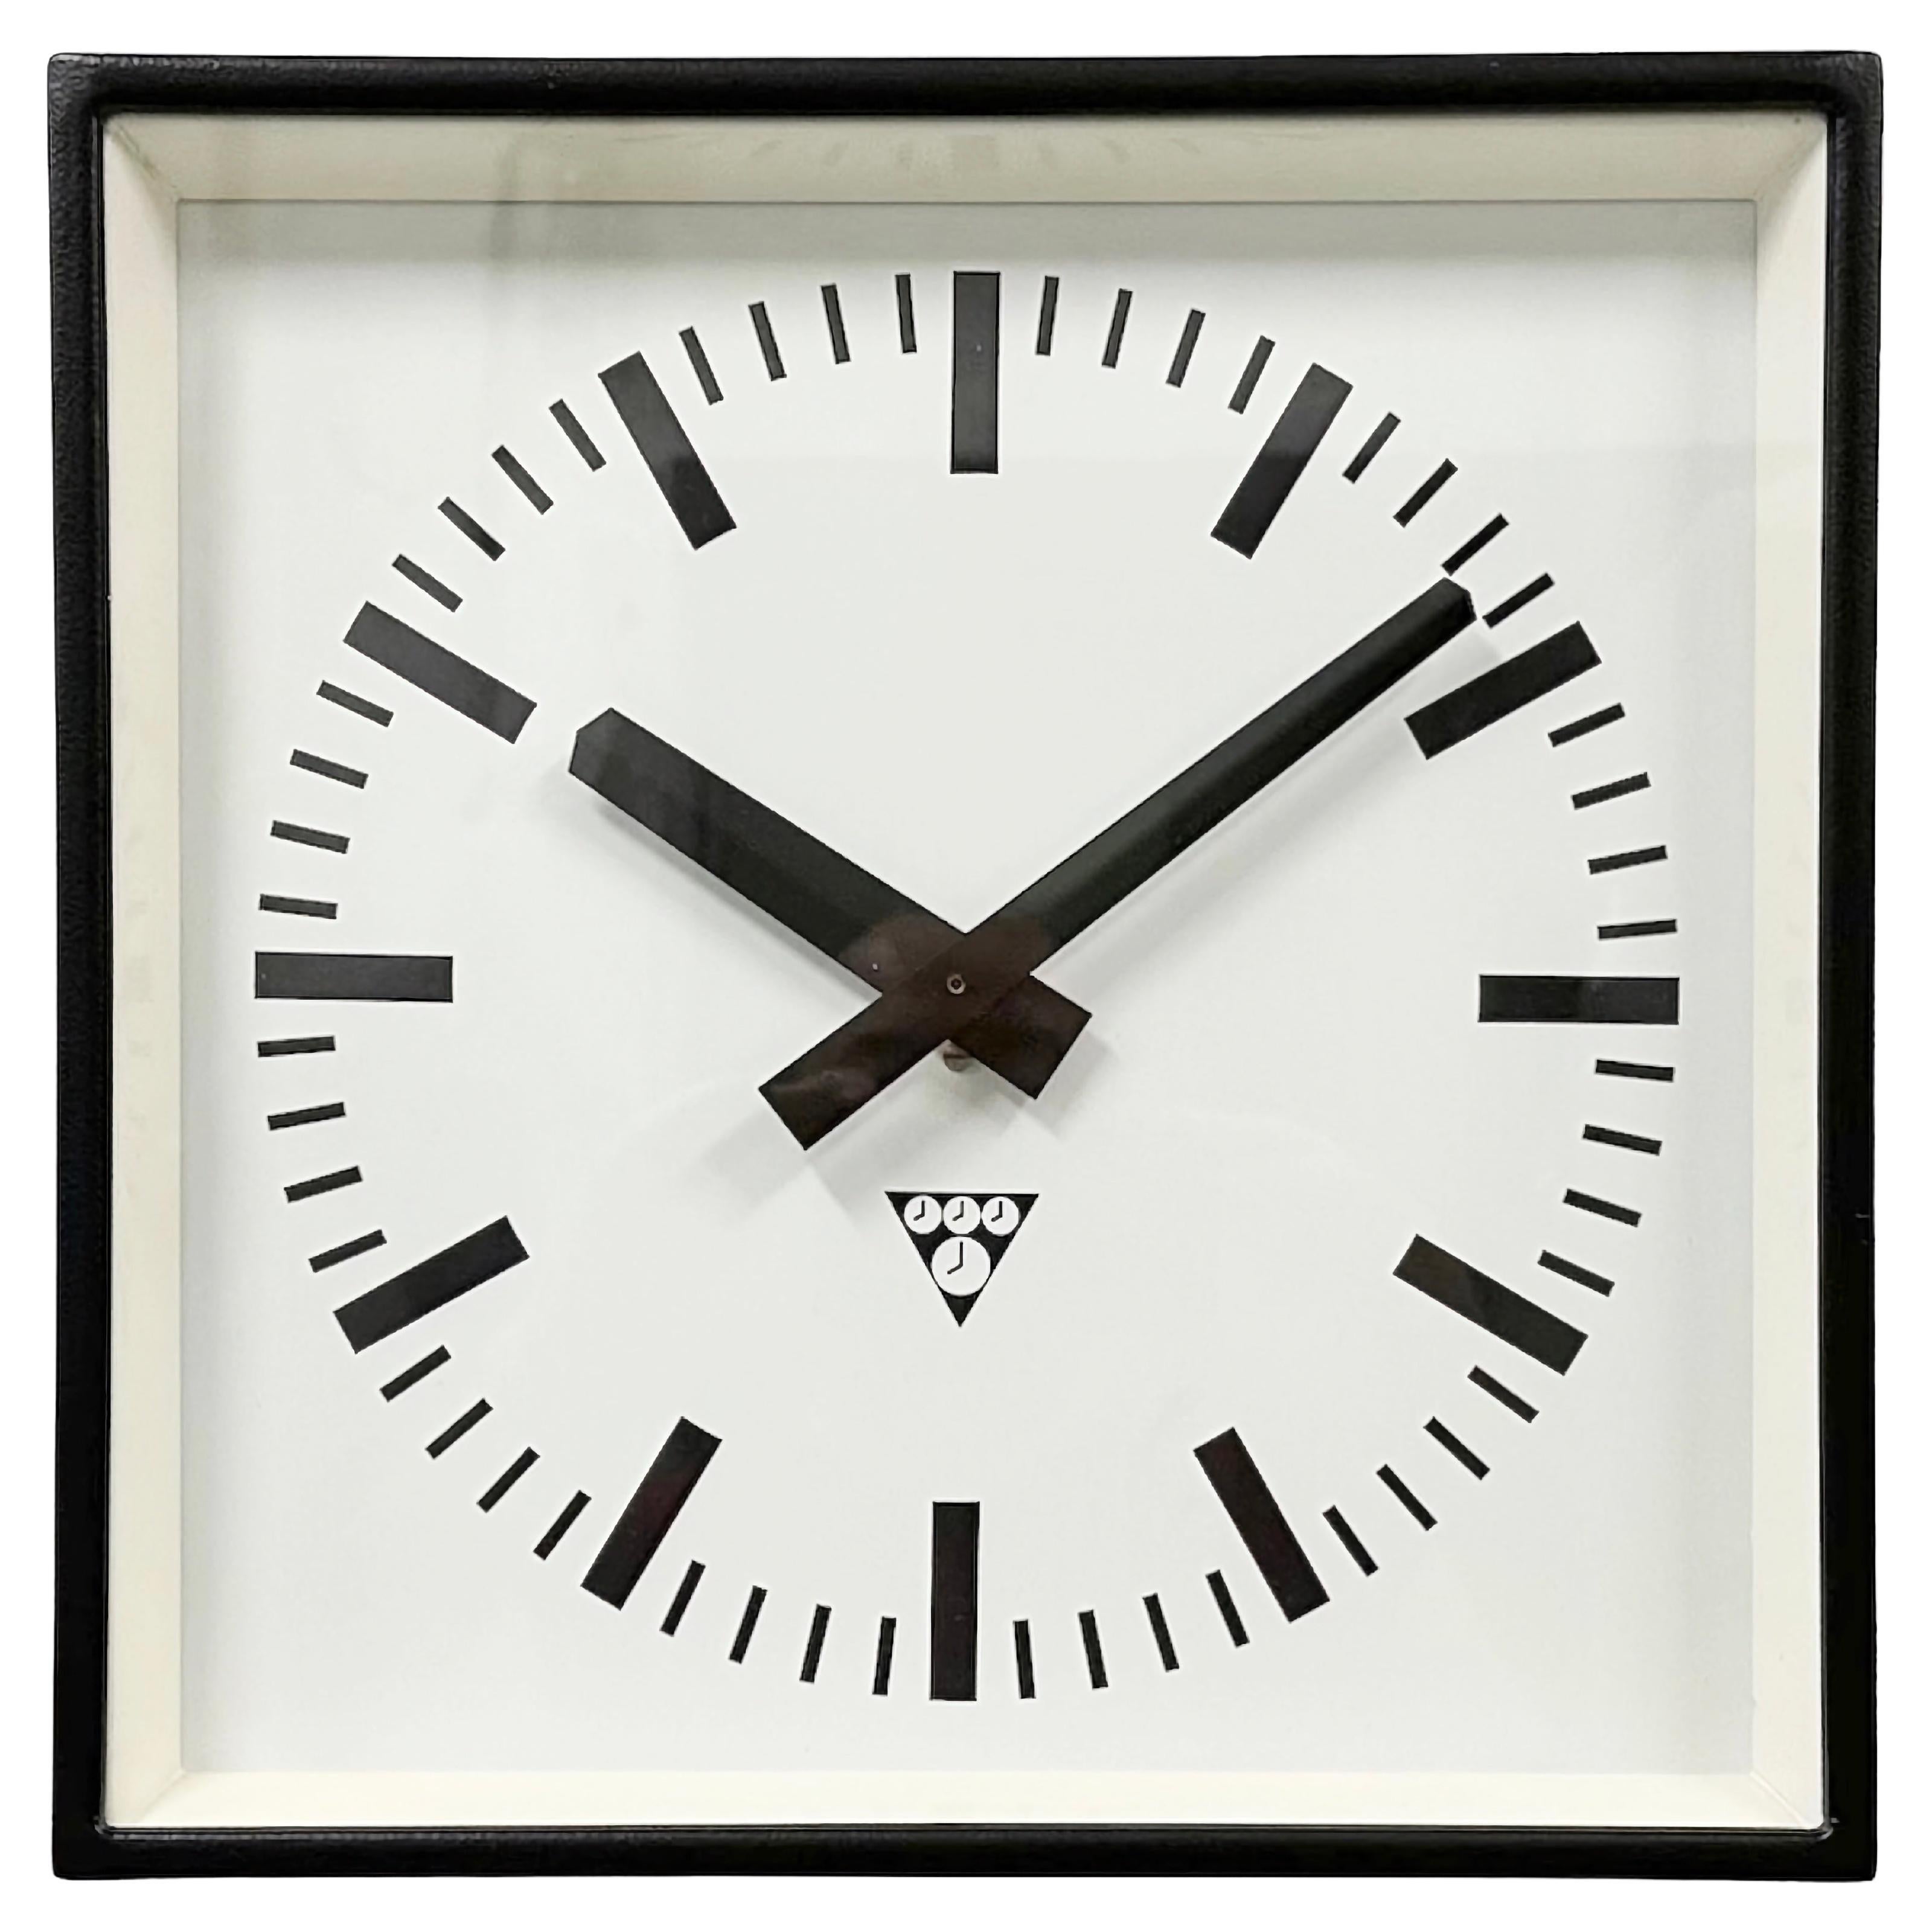 Black Industrial Square Wall Clock from Pragotron, 1970s For Sale